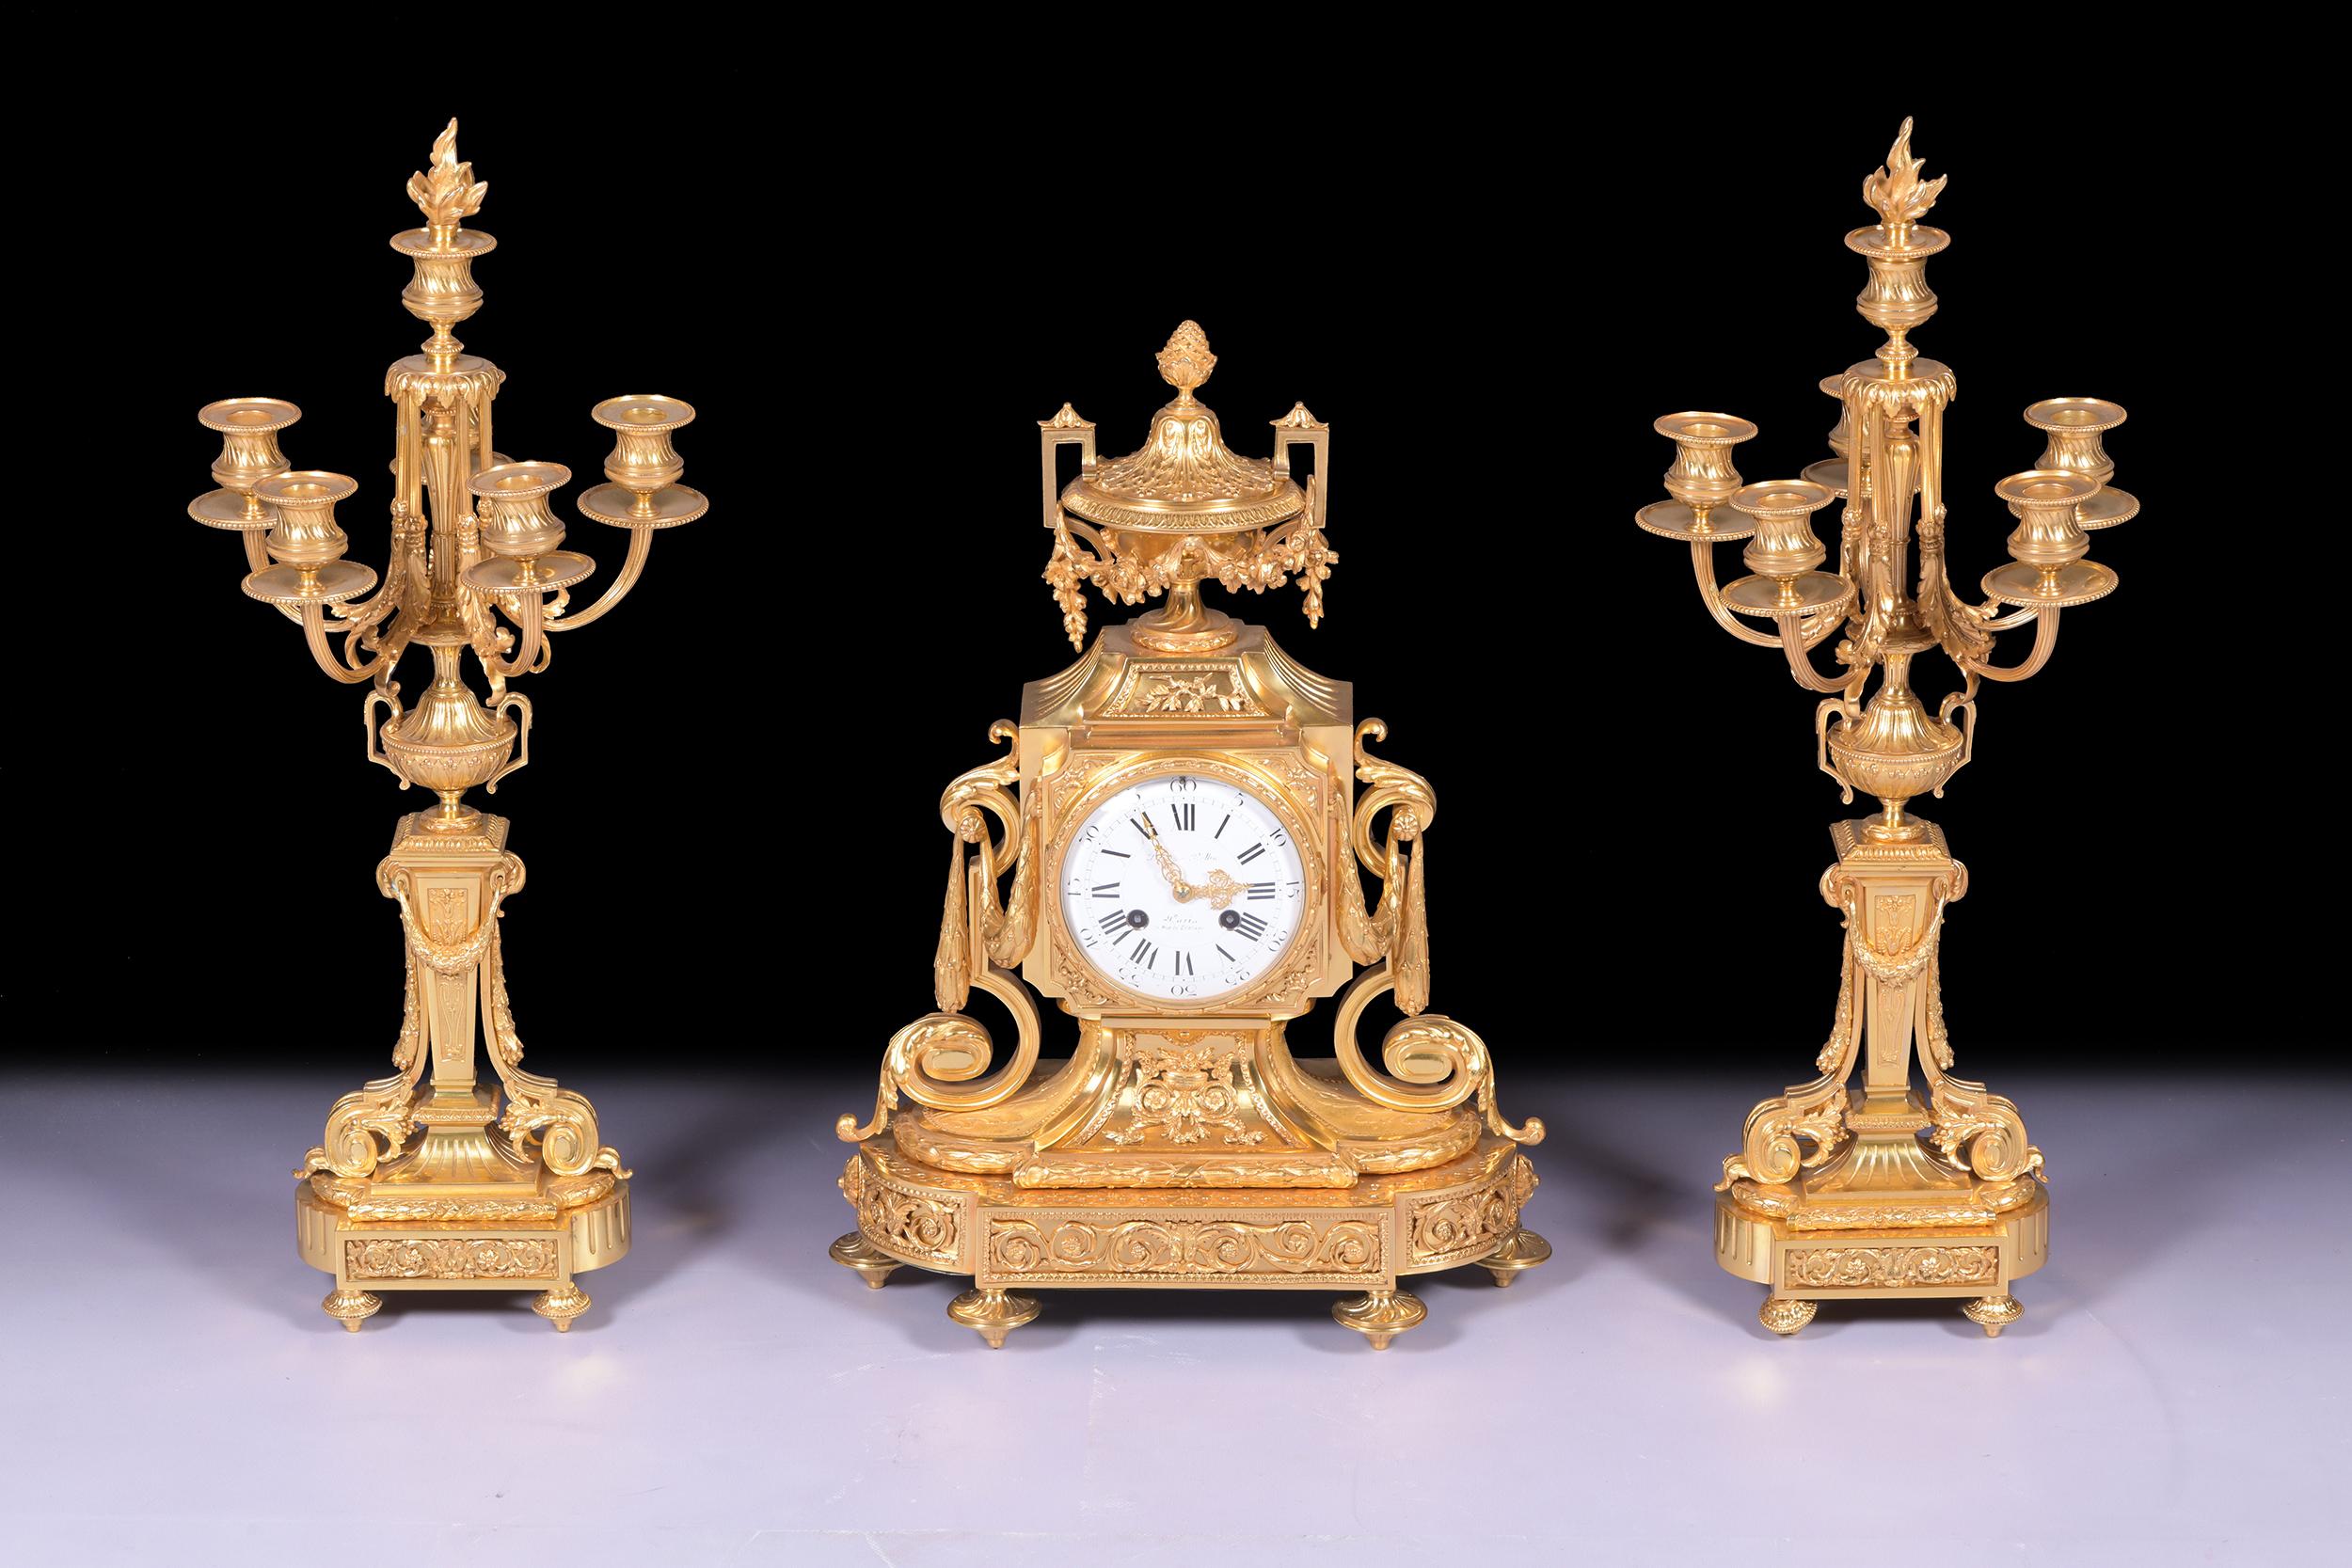 An exceptional quality three-piece clock set designed in a grand neoclassical style by 'Domange Rollin Rue de Bretagne Paris'. France.

The set is comprised of a central clock and two flanking candelabra. The clock features a circular white enamel